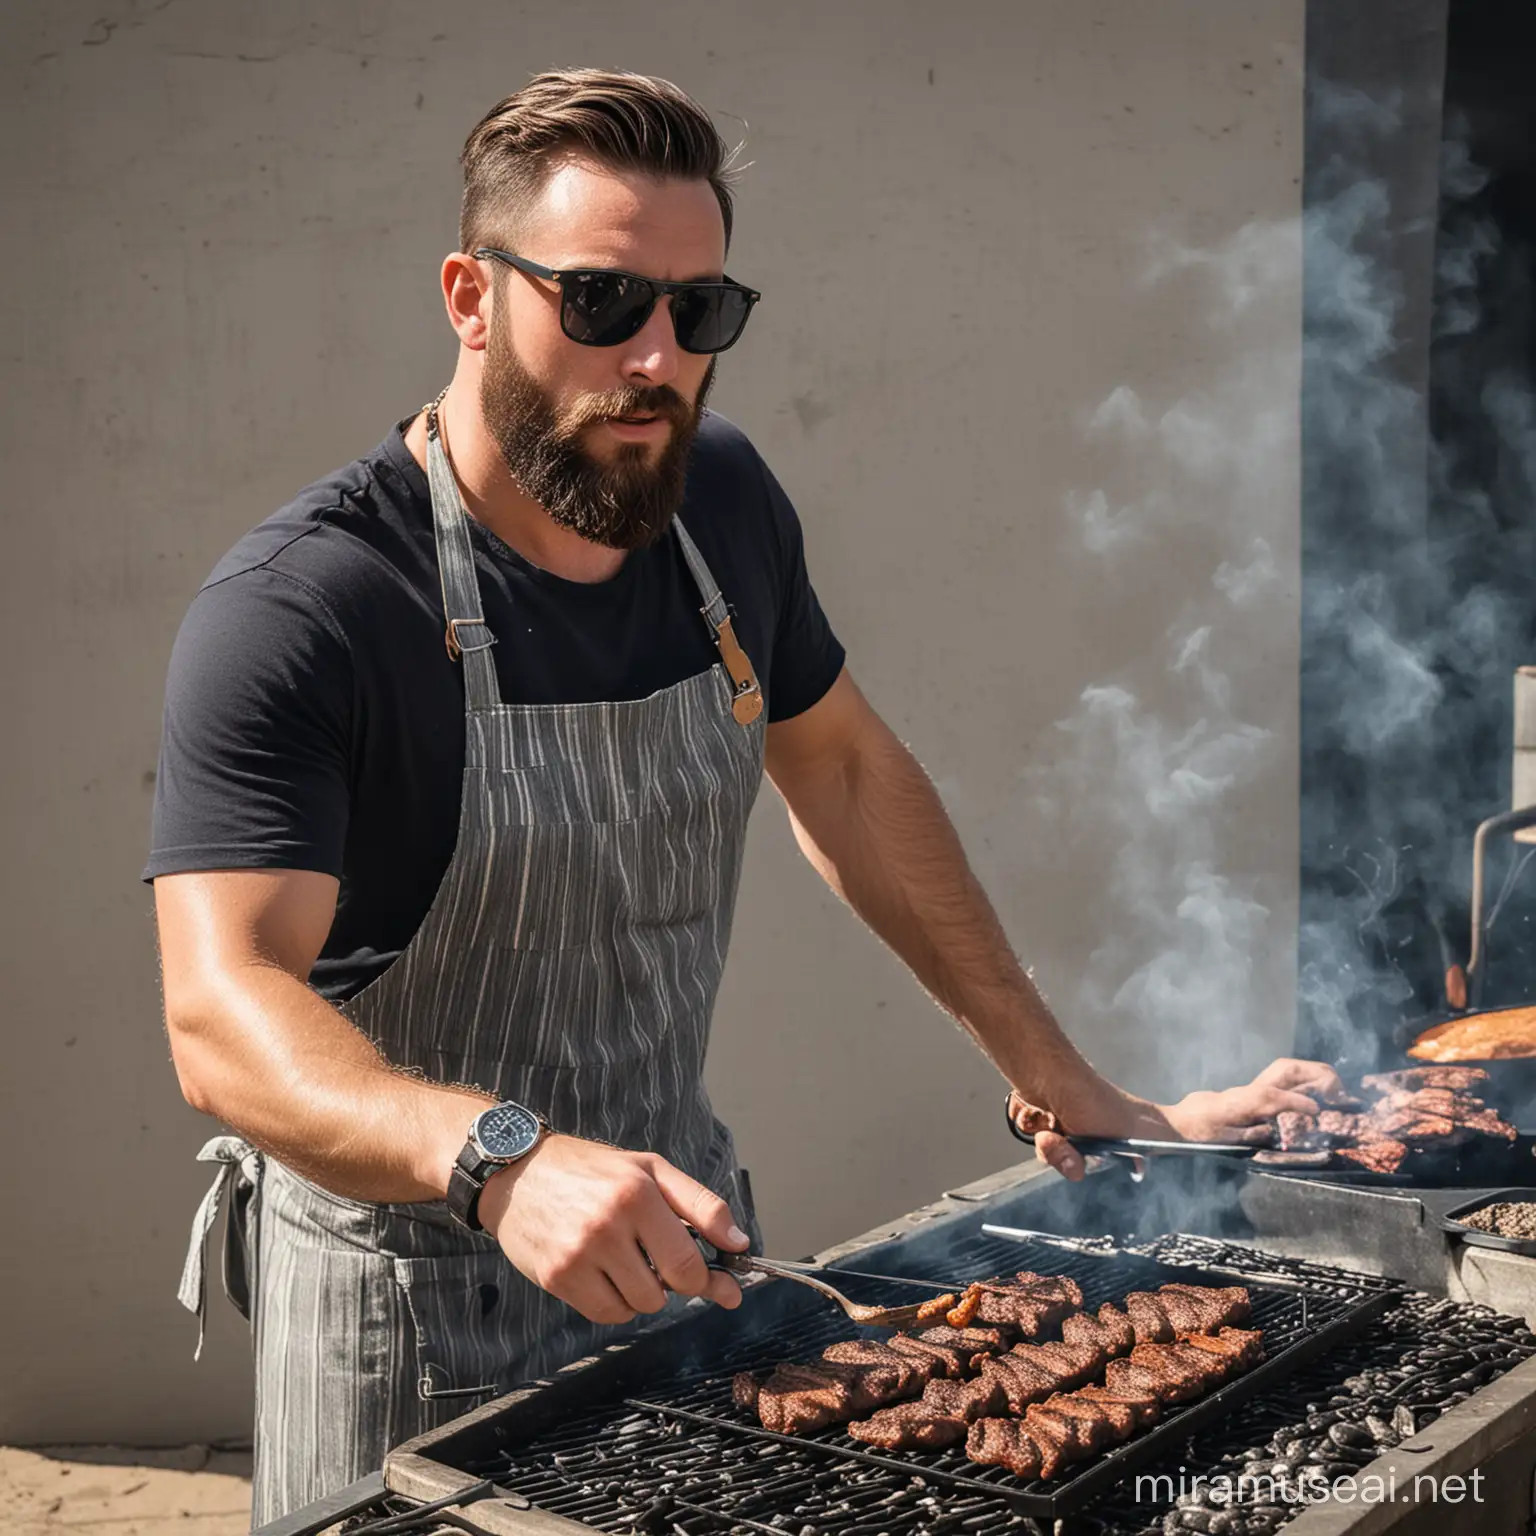 Bearded Man Grilling with Style Apron Sunglasses and Cuban Chain